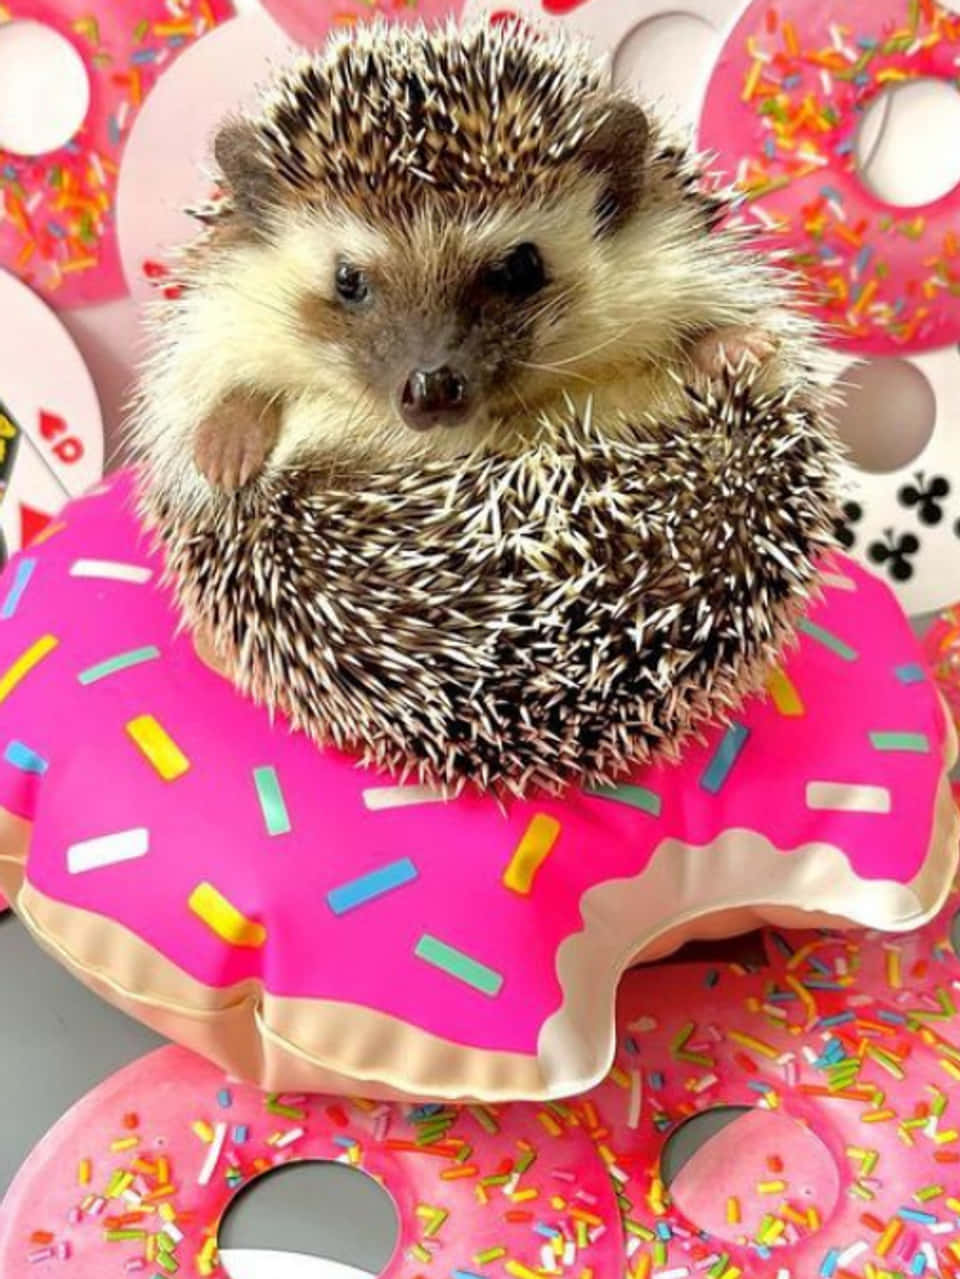 Cute Hedgehog On Donut Pillows Picture